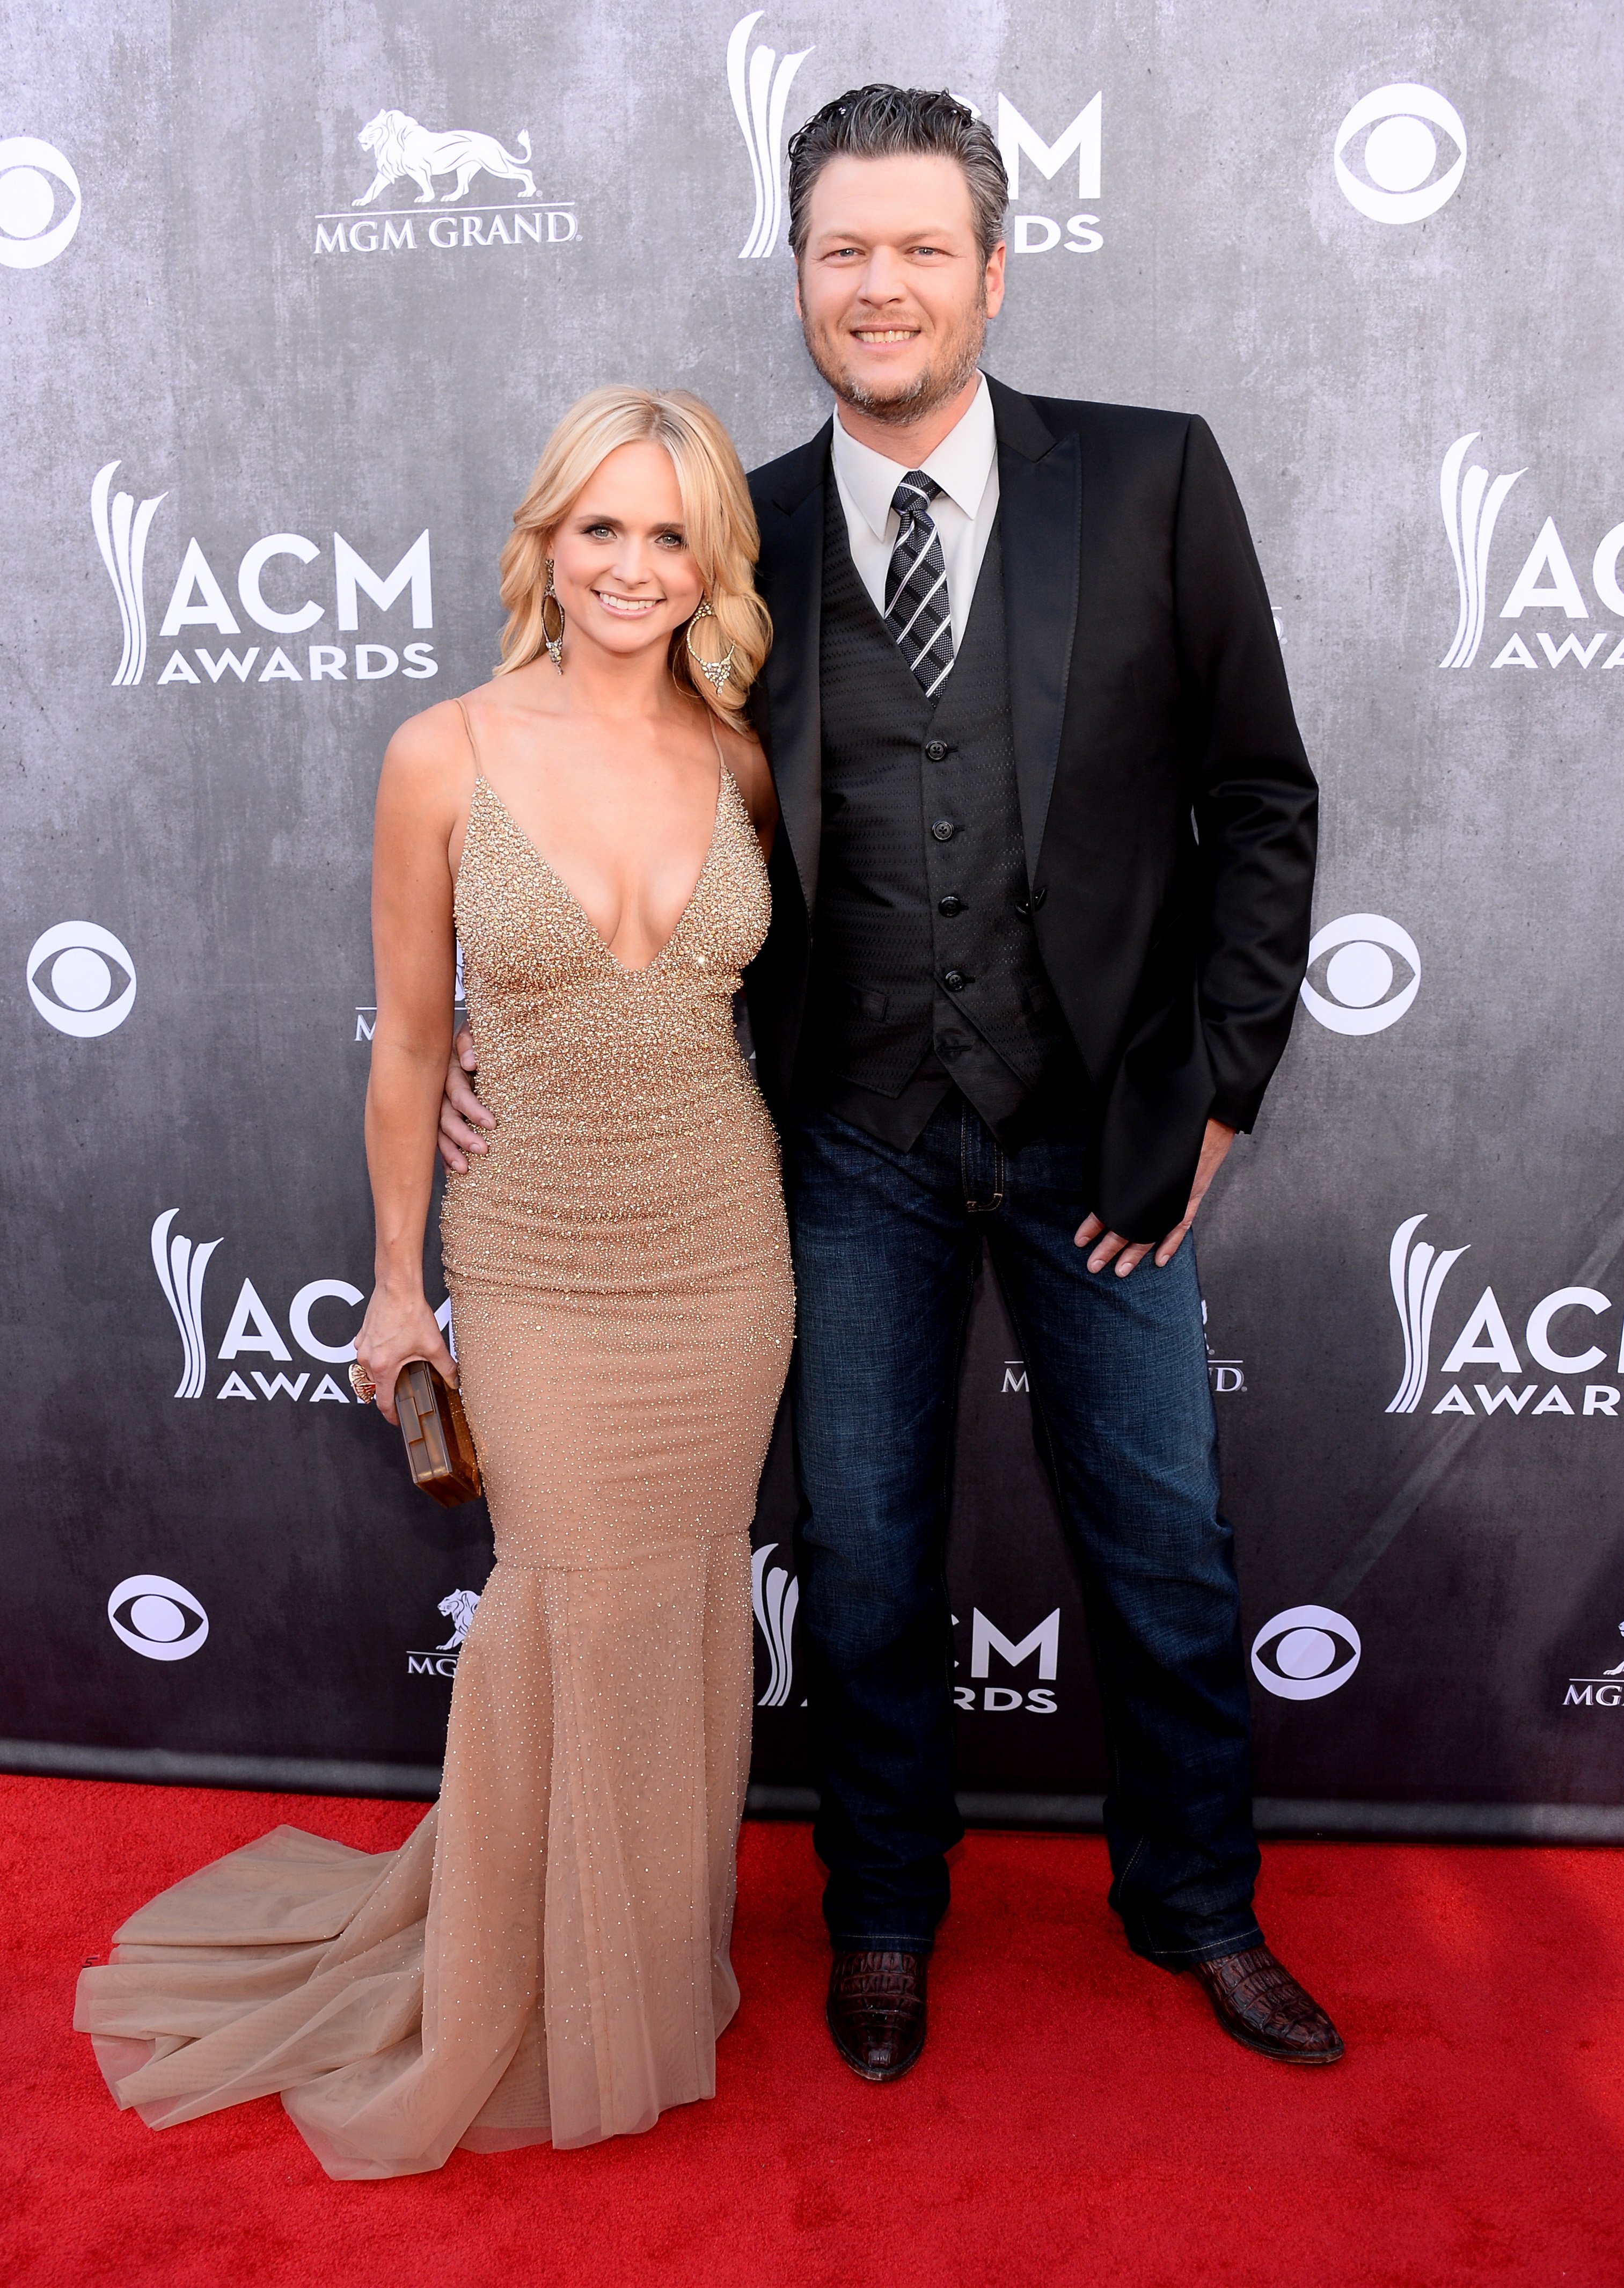 Miranda Lambert and Blake Shelton at the 49th Annual Academy of Country Music Awards on April 6, 2014, in Las Vegas, Nevada | Source: Getty Images